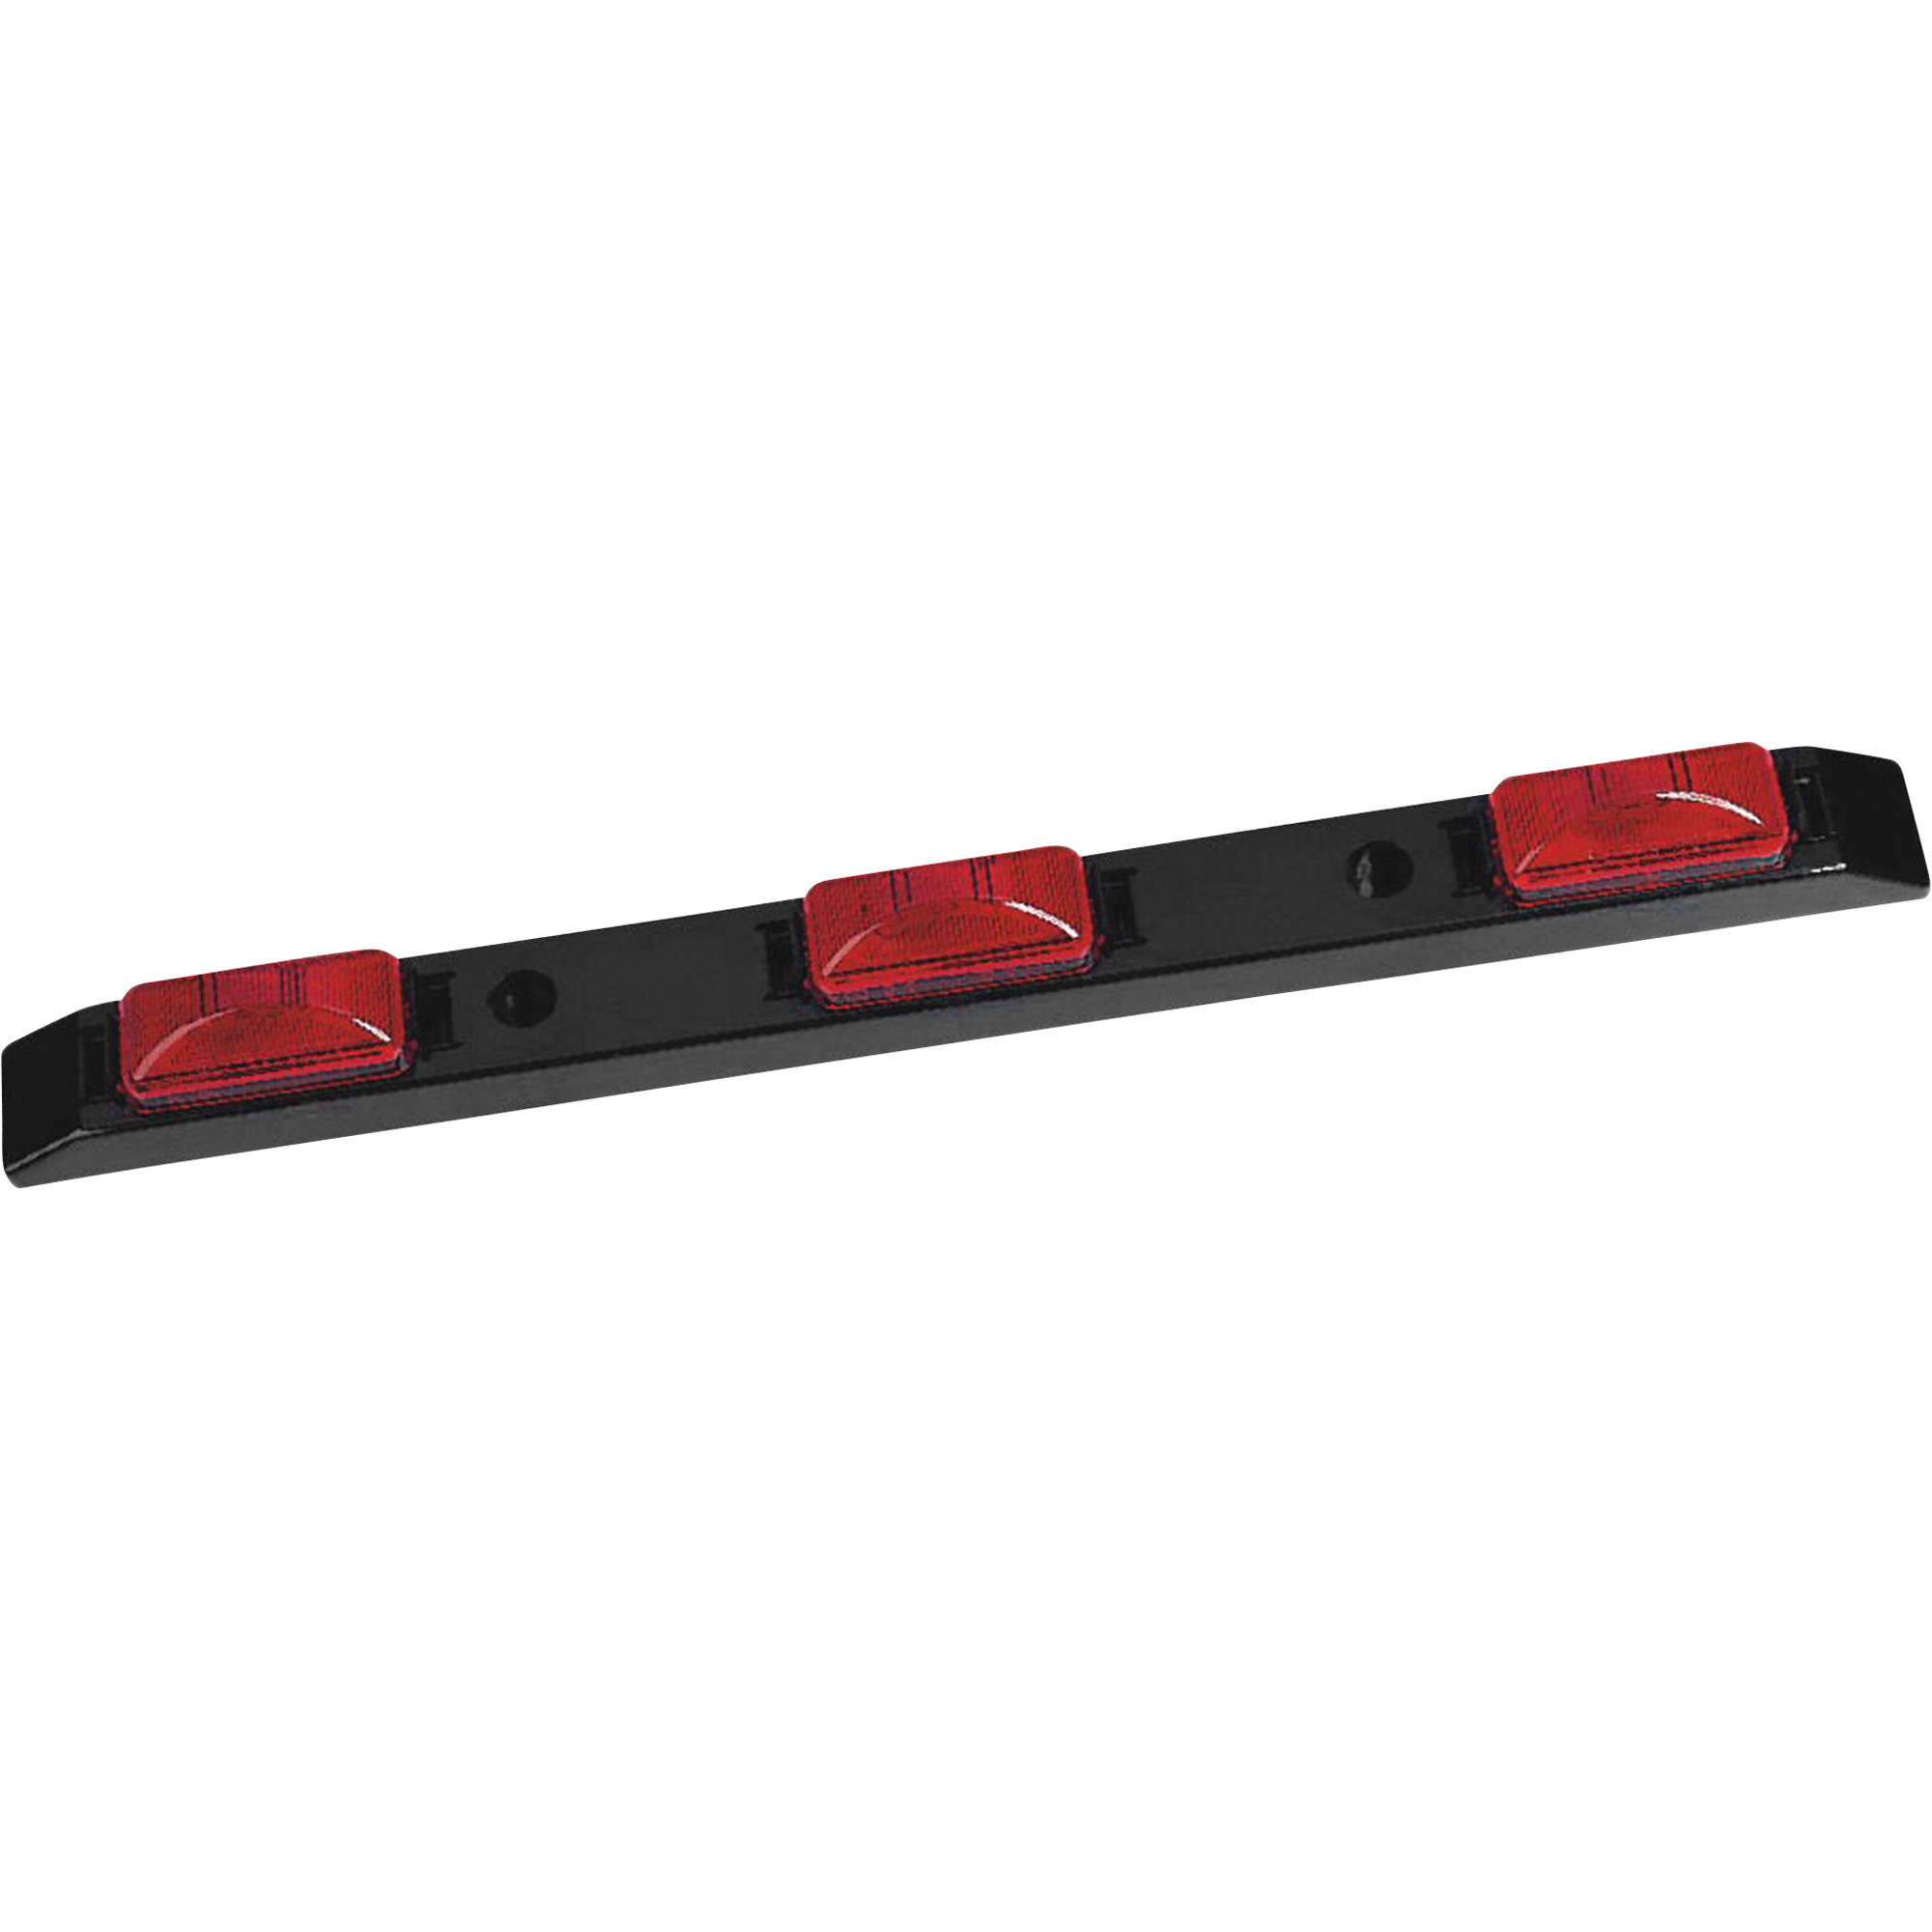 Hopkins Towing Solutions 17Inch Identification Light Bar, Red Light with Black Base, Model B3485R